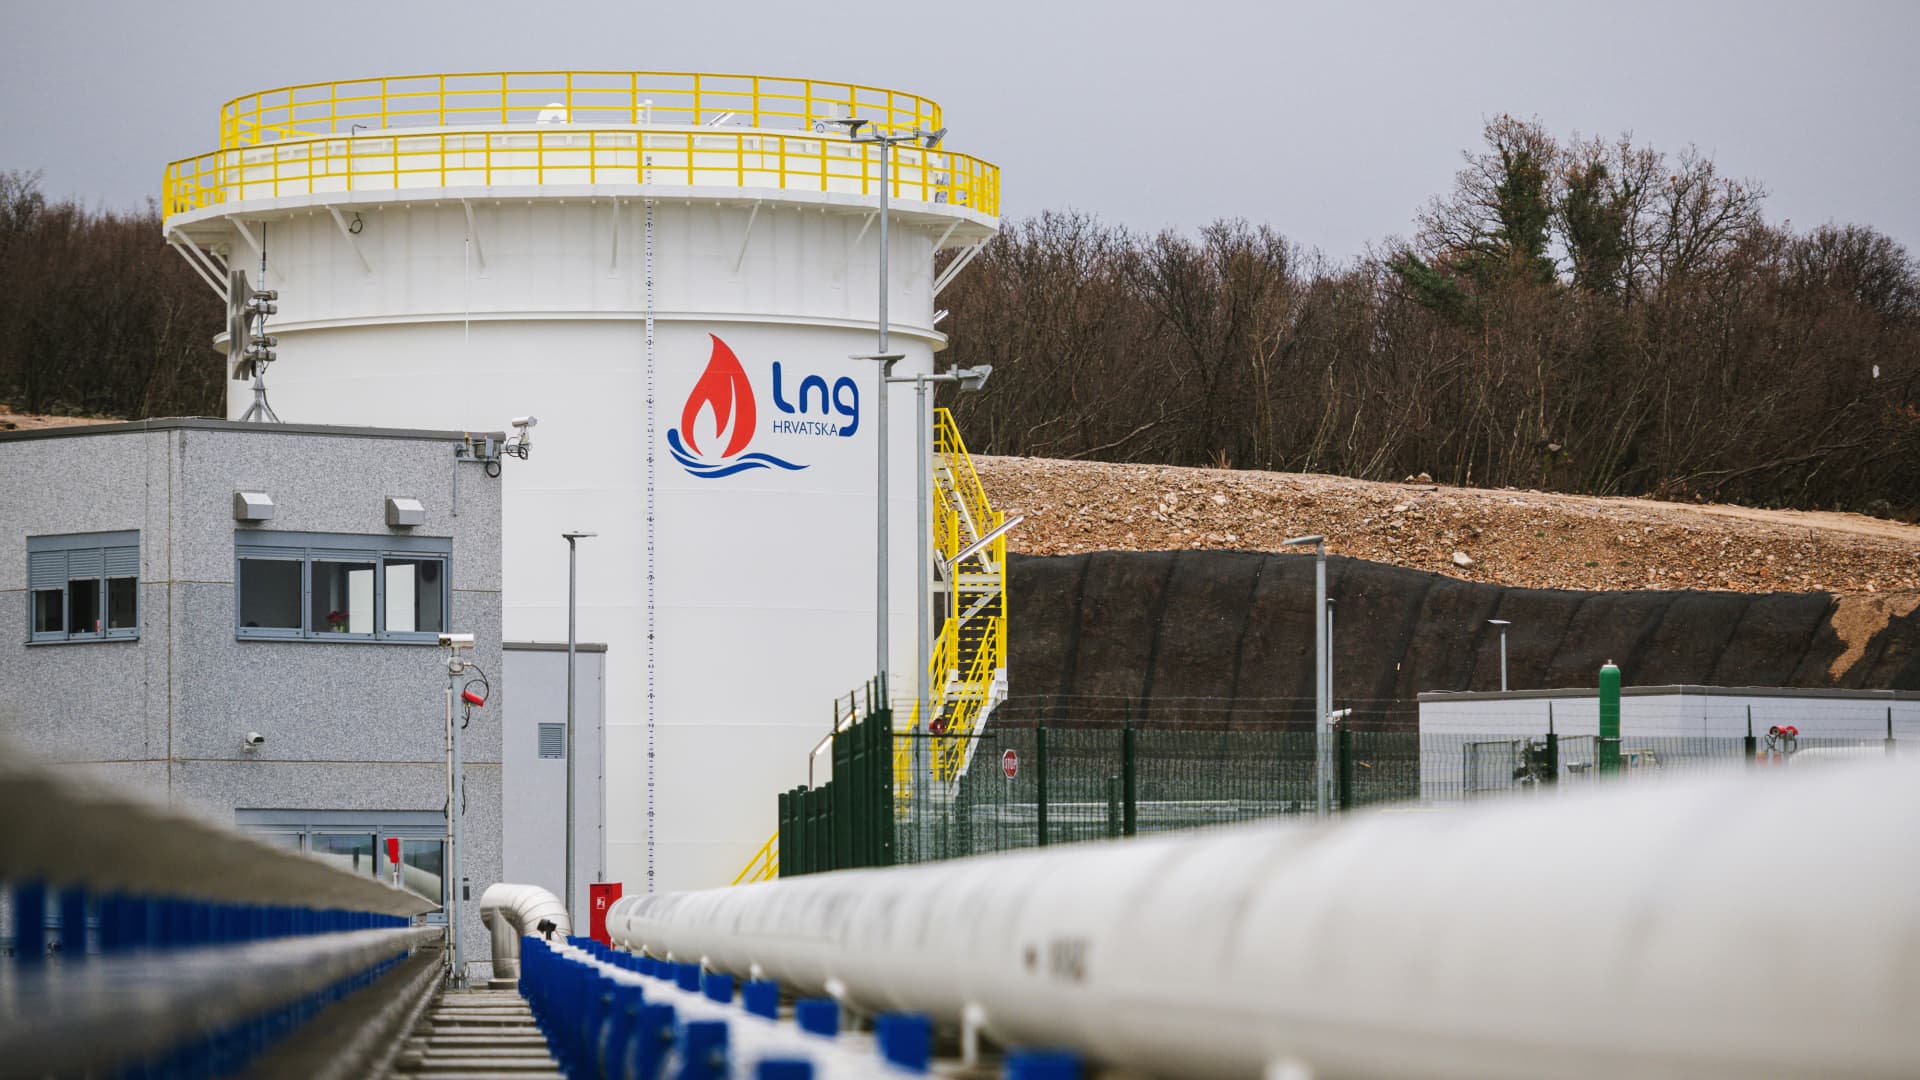 A liquid natural gas (LNG) storage silo at the LNG terminal, operated by LNG Croatia LLC, in Krk, Croatia, on Monday, Jan. 25, 2021.